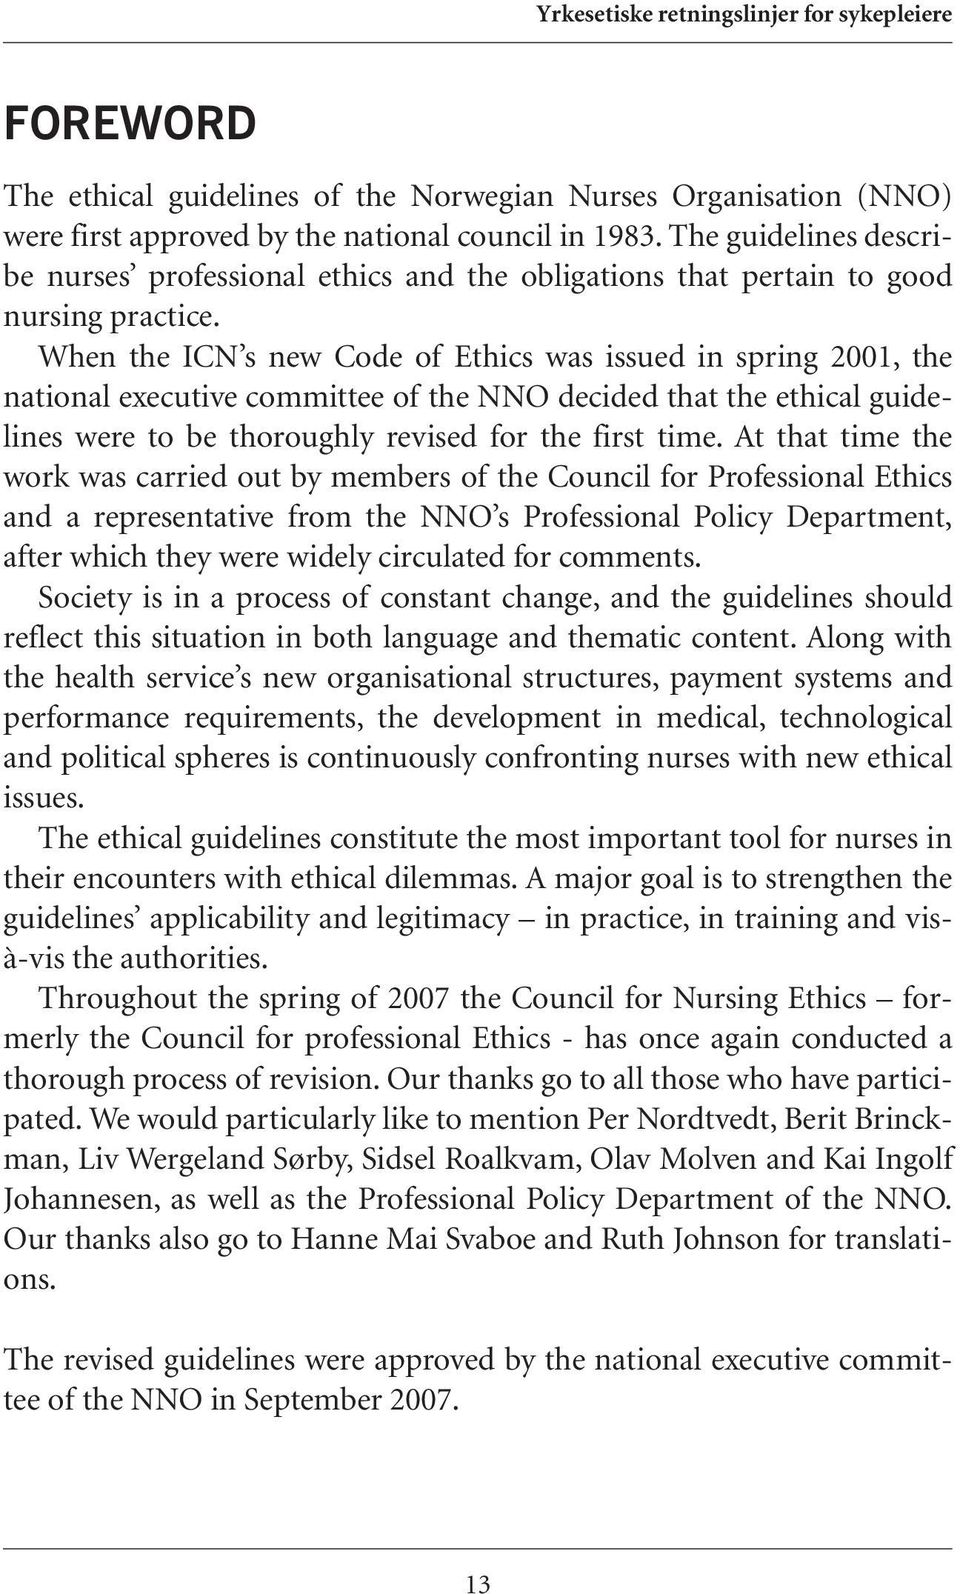 When the ICN s new Code of Ethics was issued in spring 2001, the national executive committee of the NNO decided that the ethical guidelines were to be thoroughly revised for the first time.